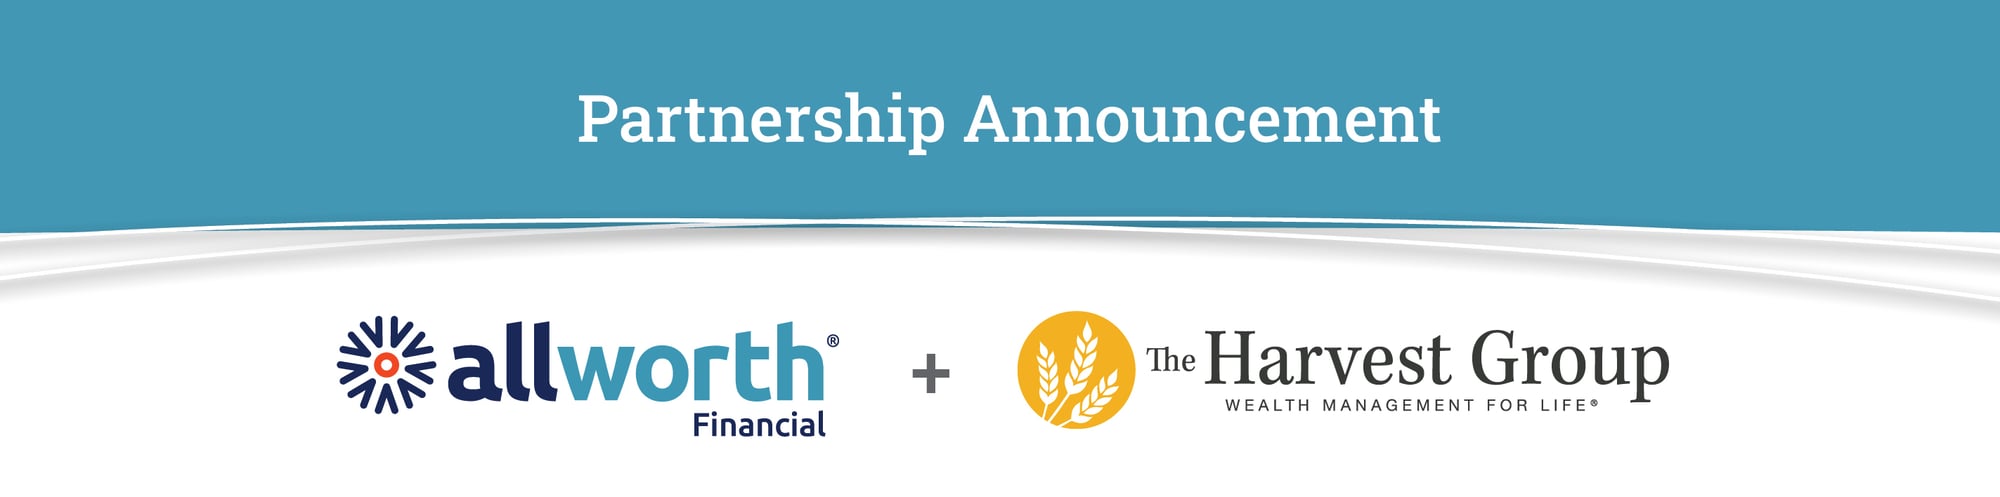 partnership announcement for Allworth Financial and the harvest group